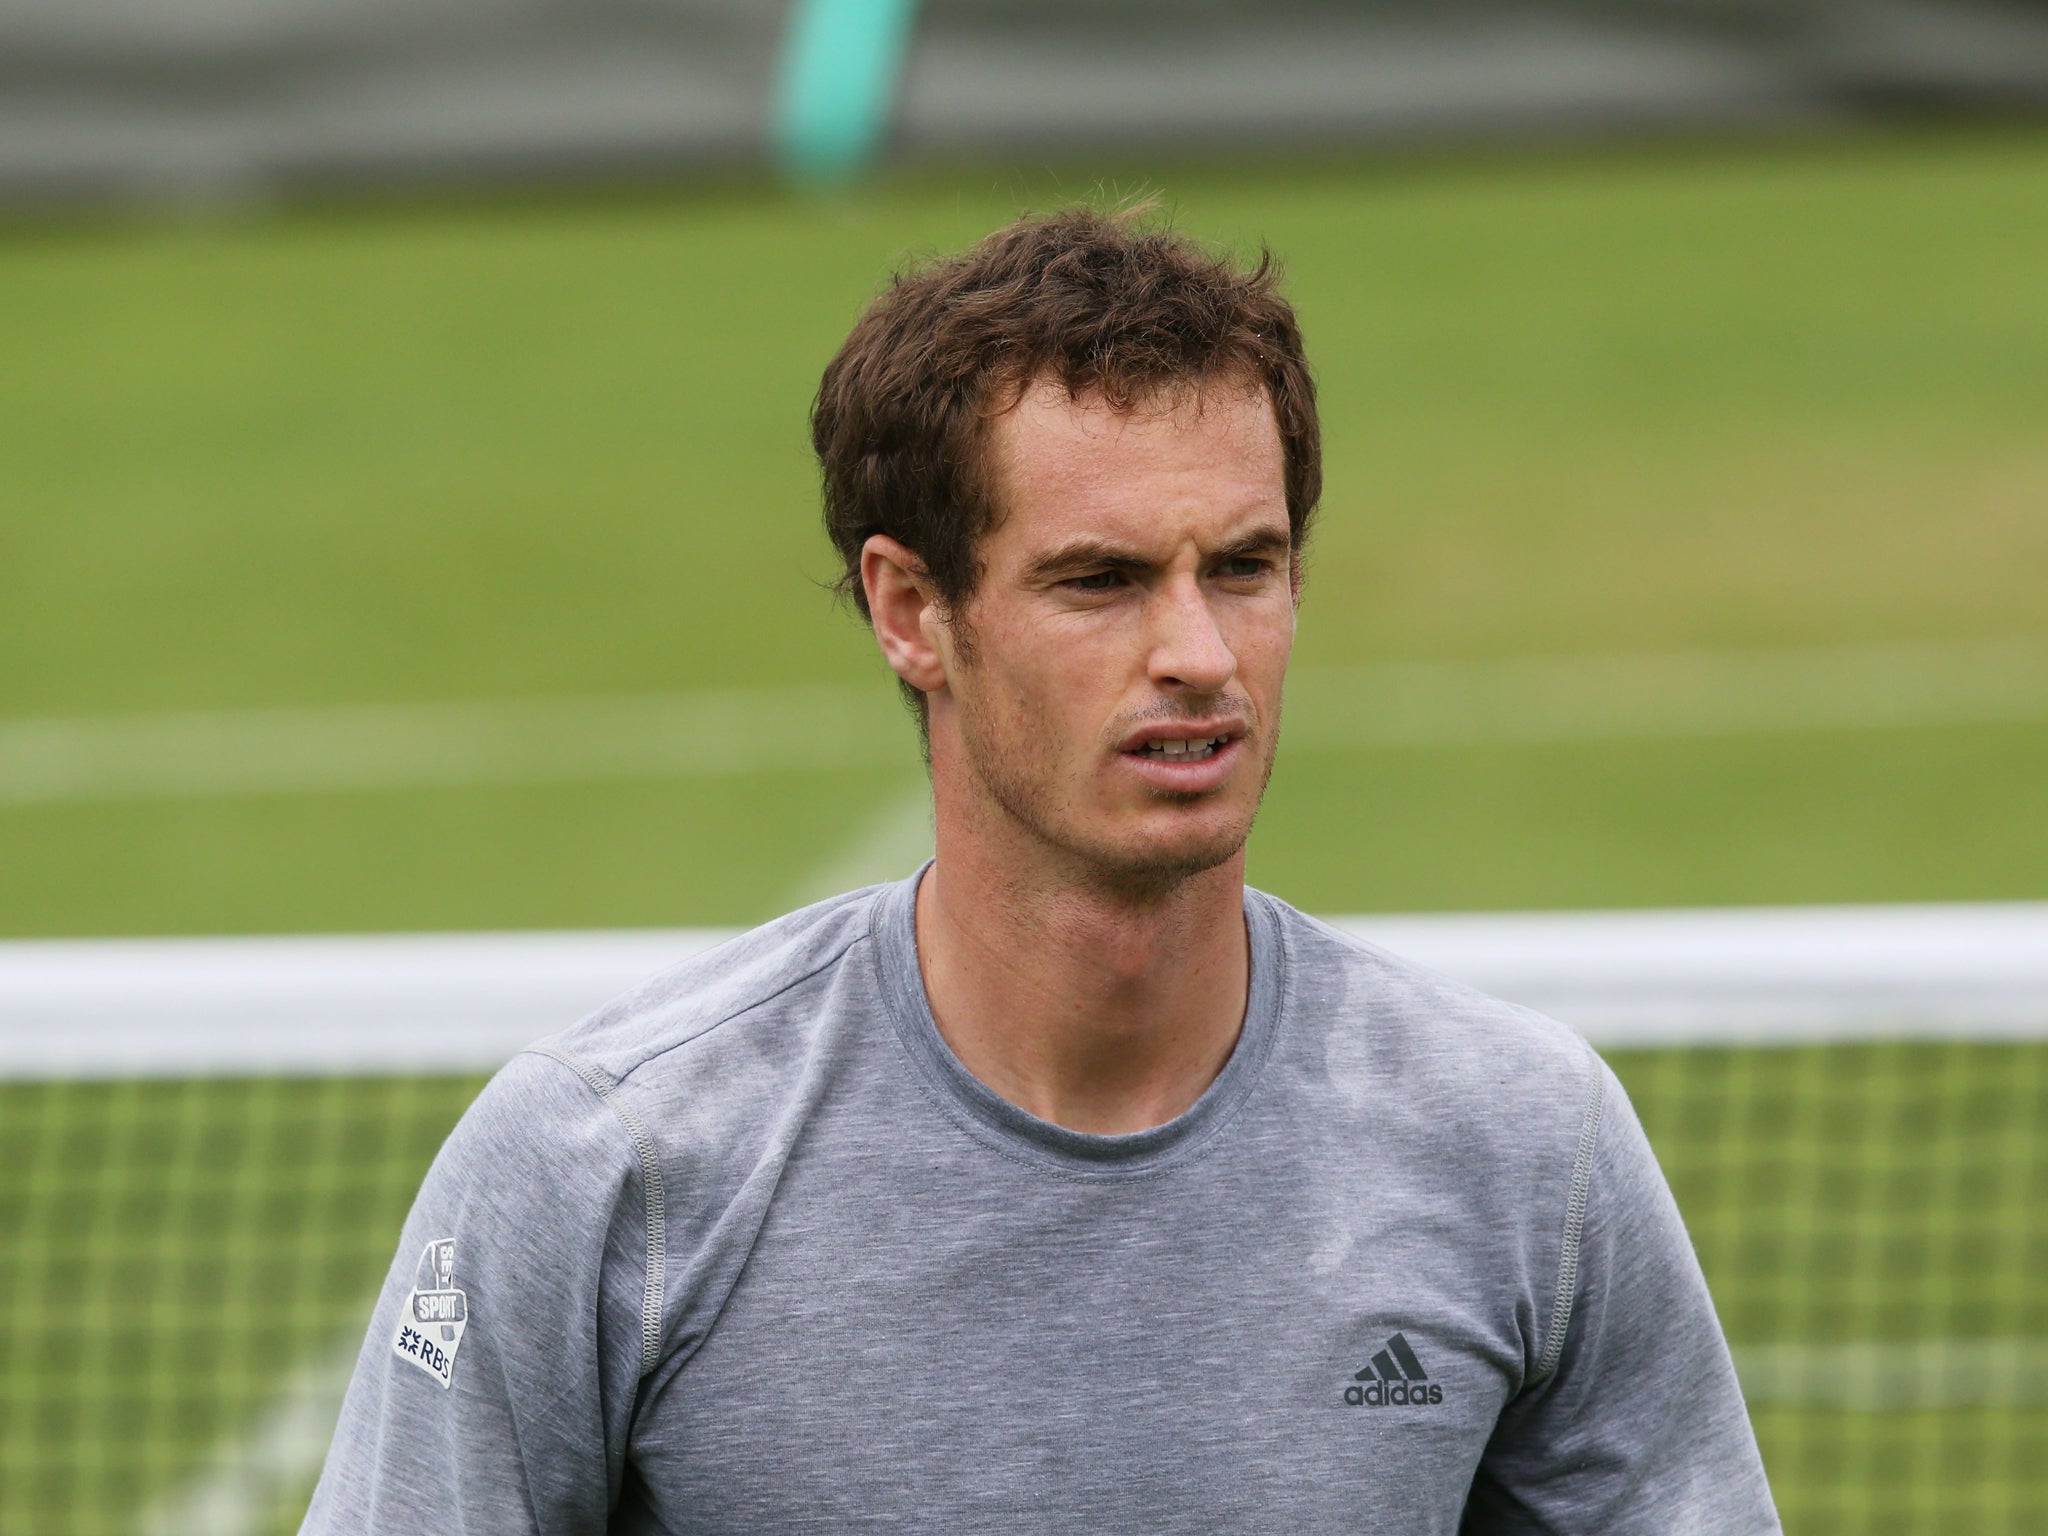 Andy Murray practicing on his day-off ahead of his third round match with Tommy Robredo